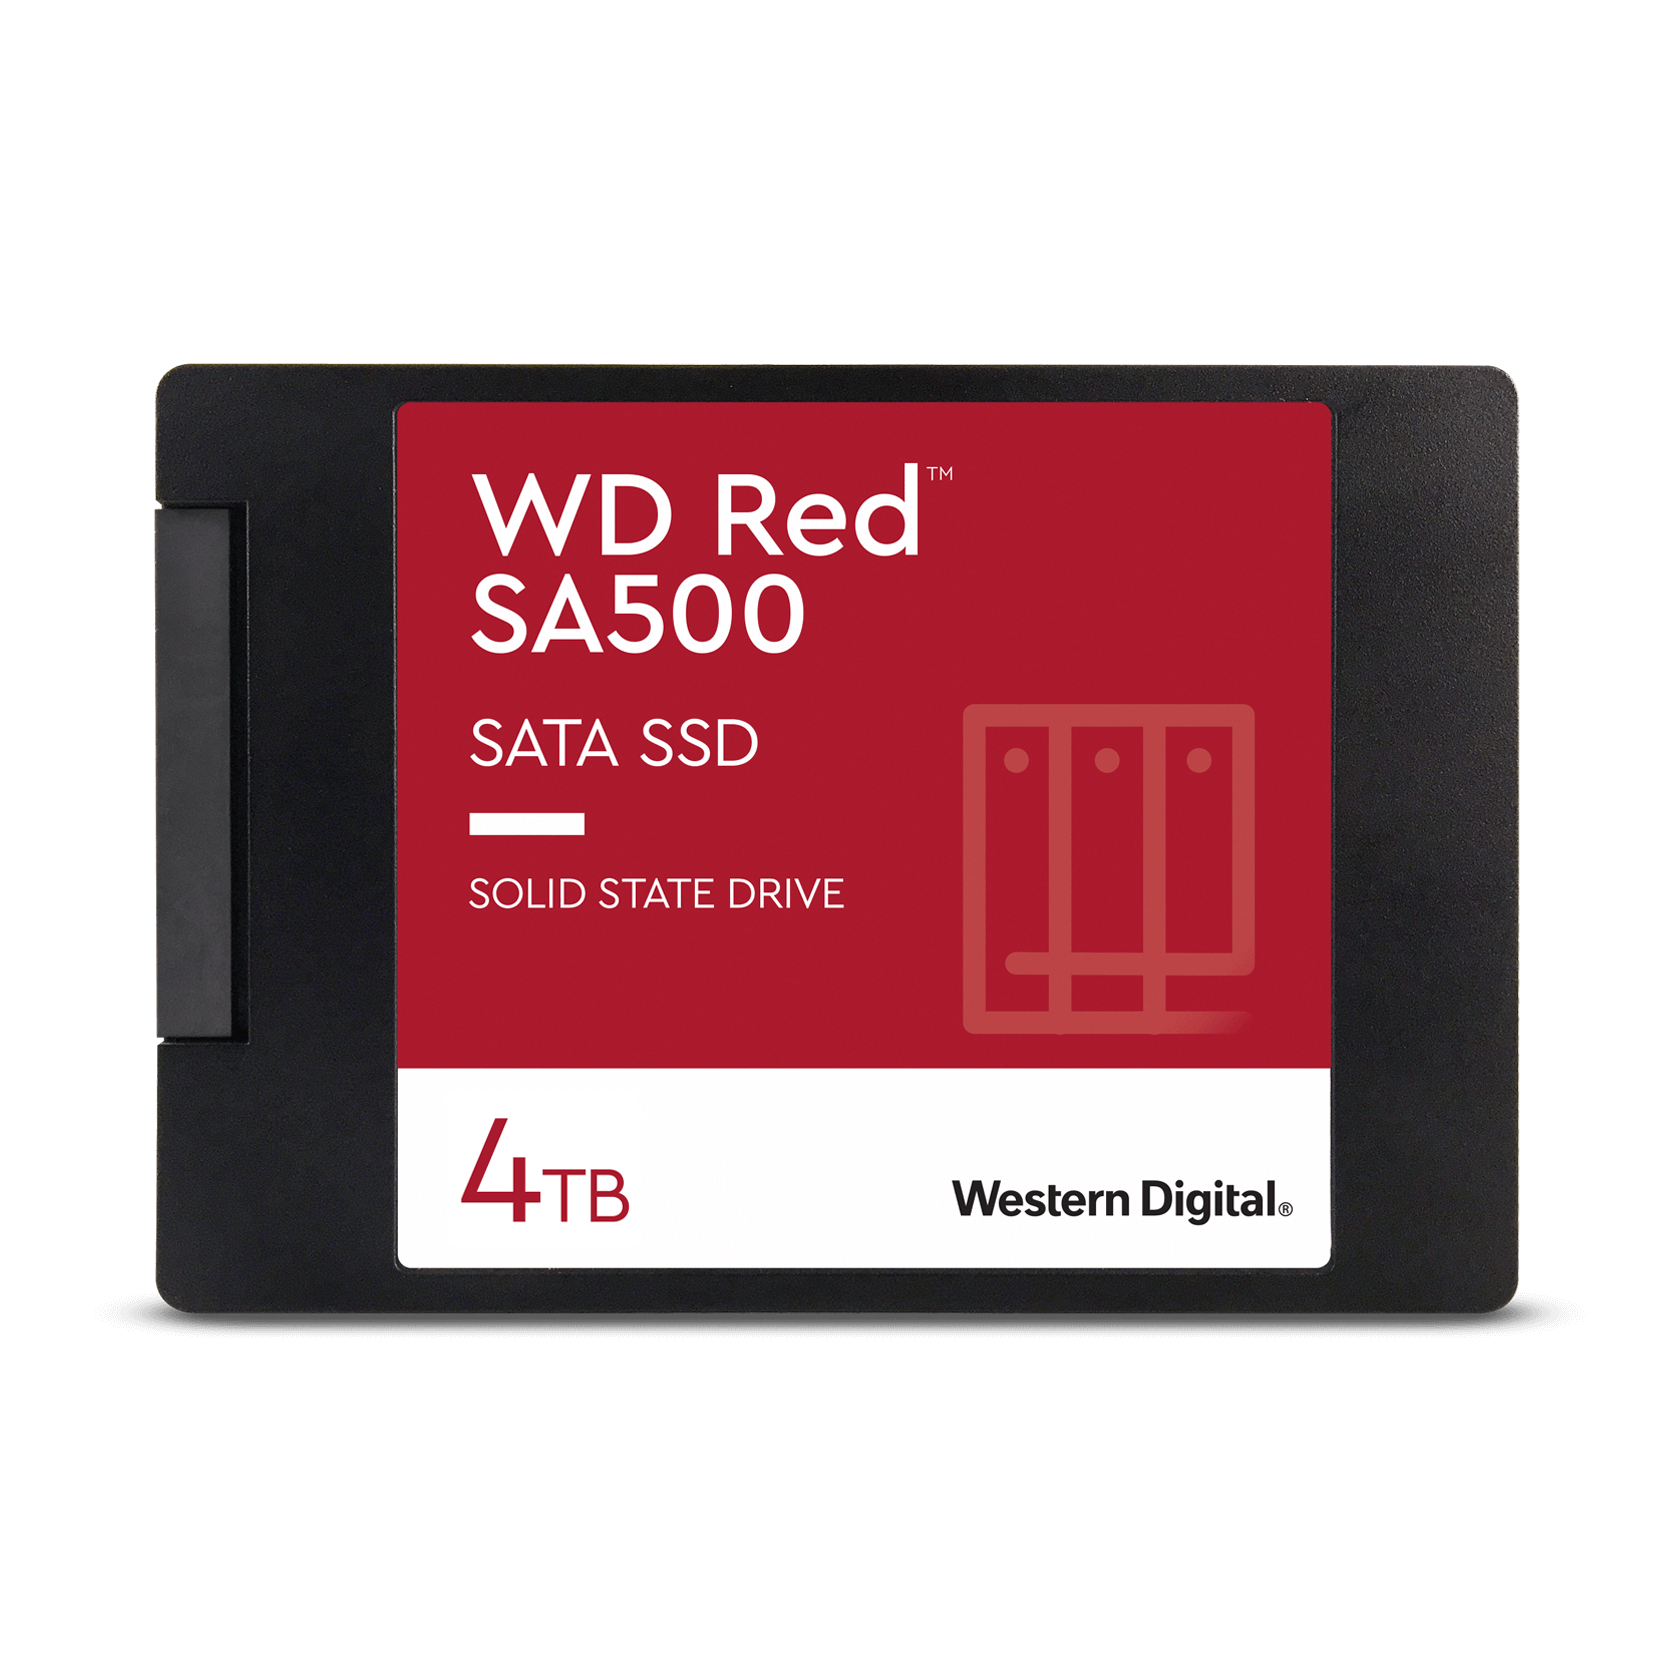 Western Digital 4TB WD SA500 NAS SATA - Solid State Drive, Red - WDS400T2R0A